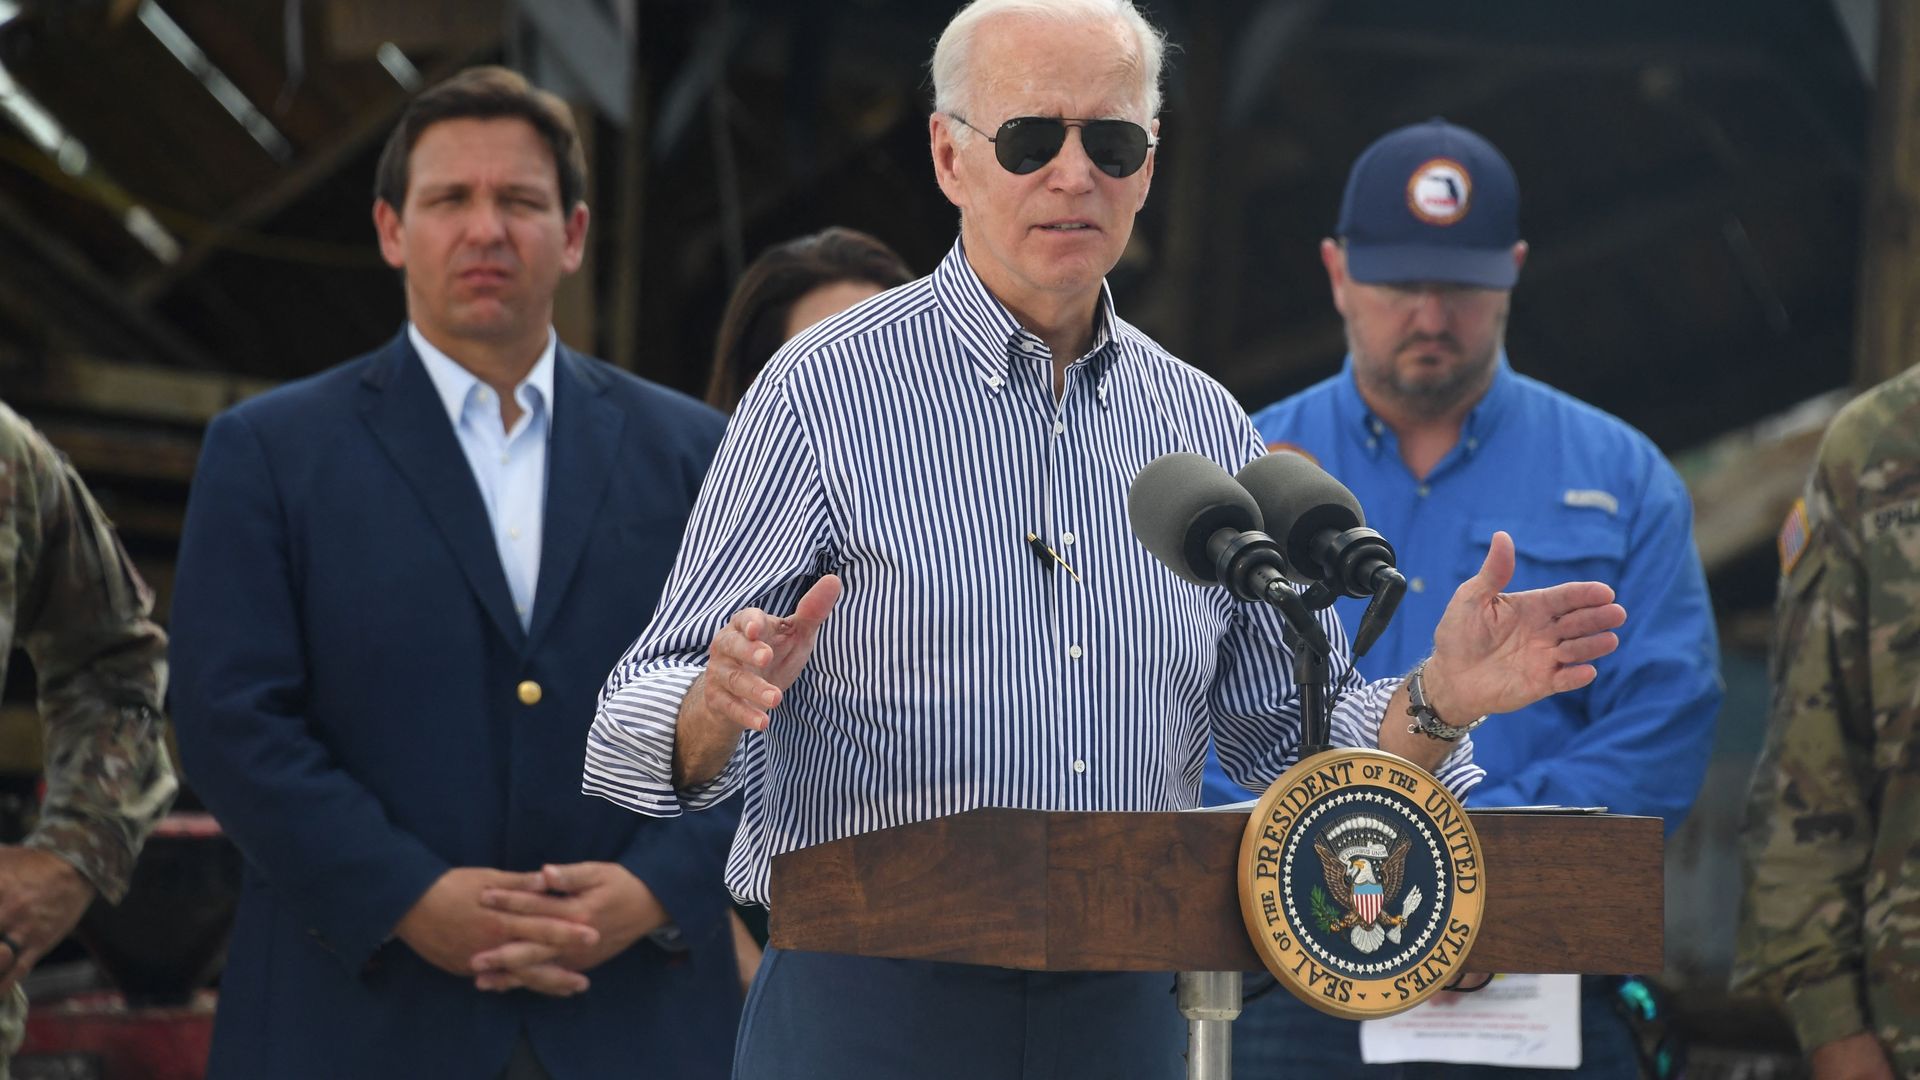 US President Joe Biden speaks in a neighborhood impacted by Hurricane Ian at Fishermans Pass in Fort Myers, Florida, on October 5, 2022 as Florida Governor Ron DeSantis looks on.